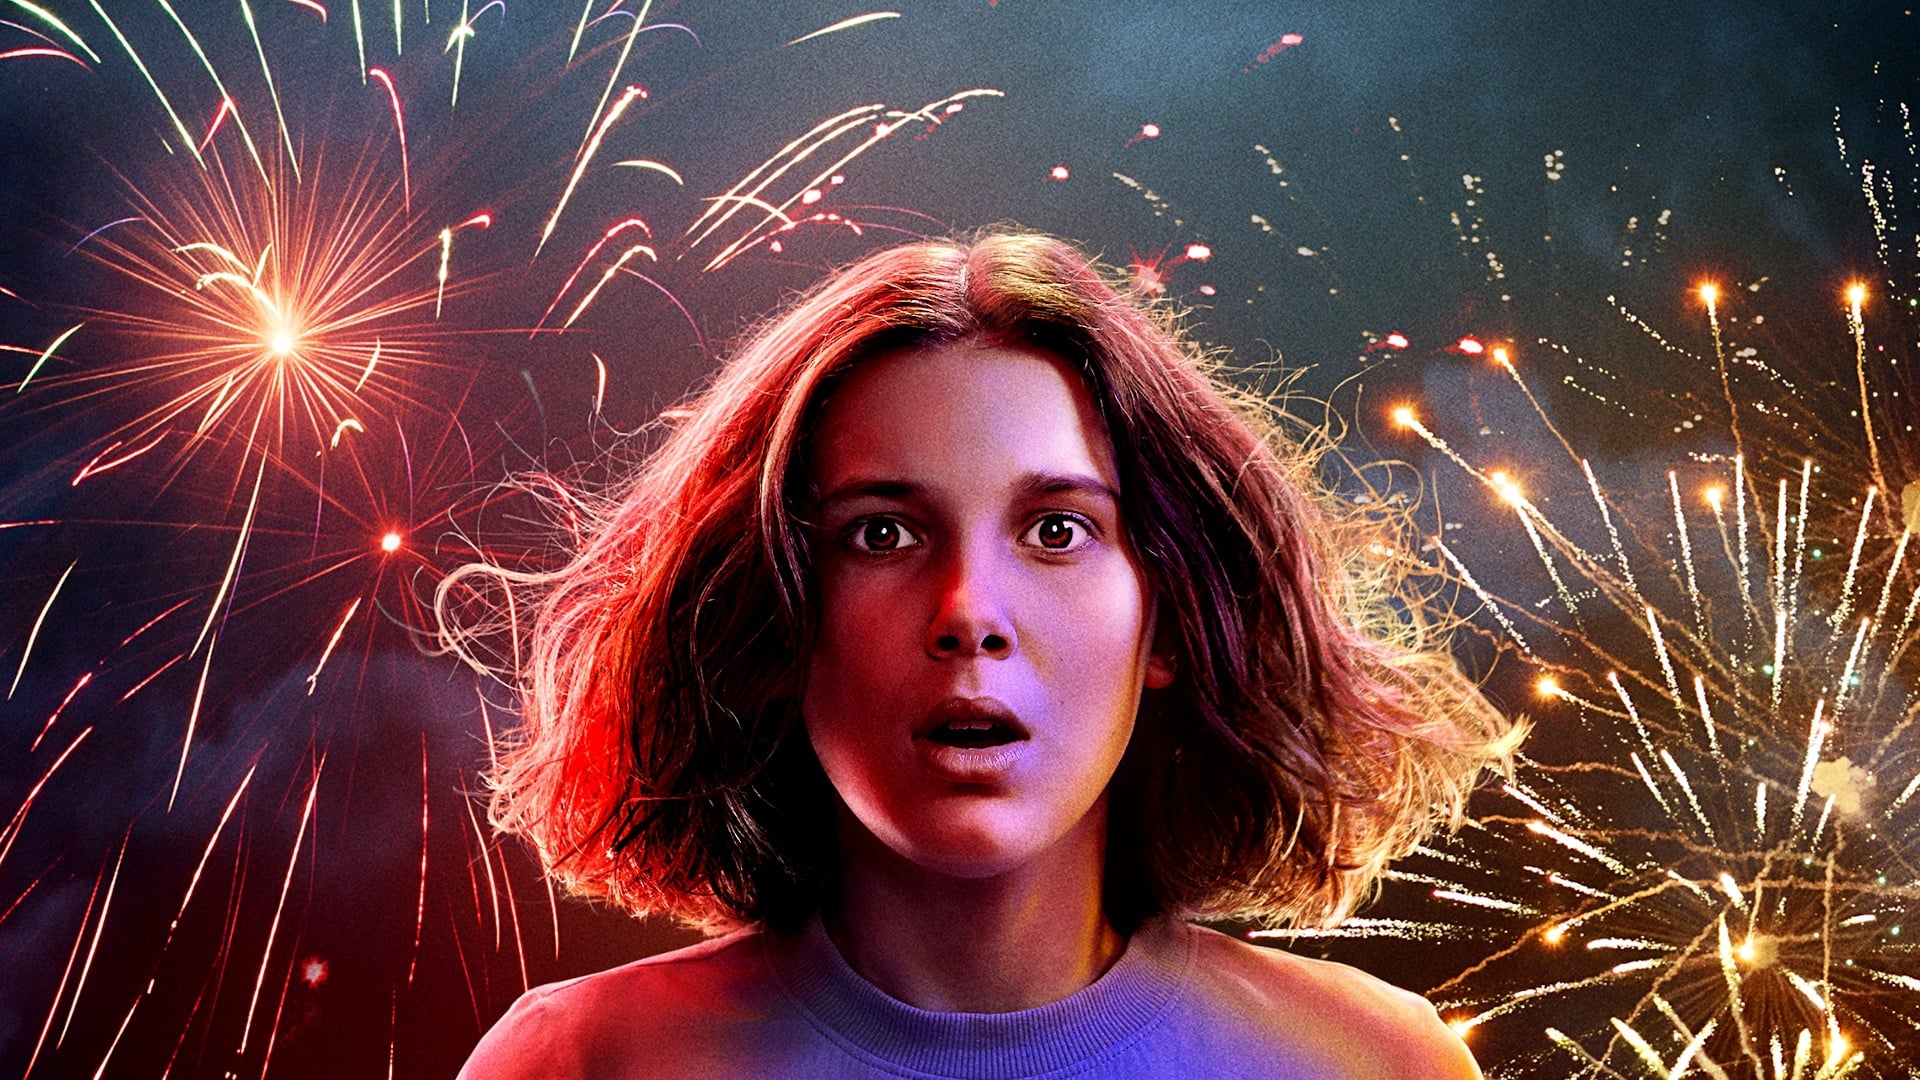 Stranger Things Season 4 Review: What went wrong for the show?